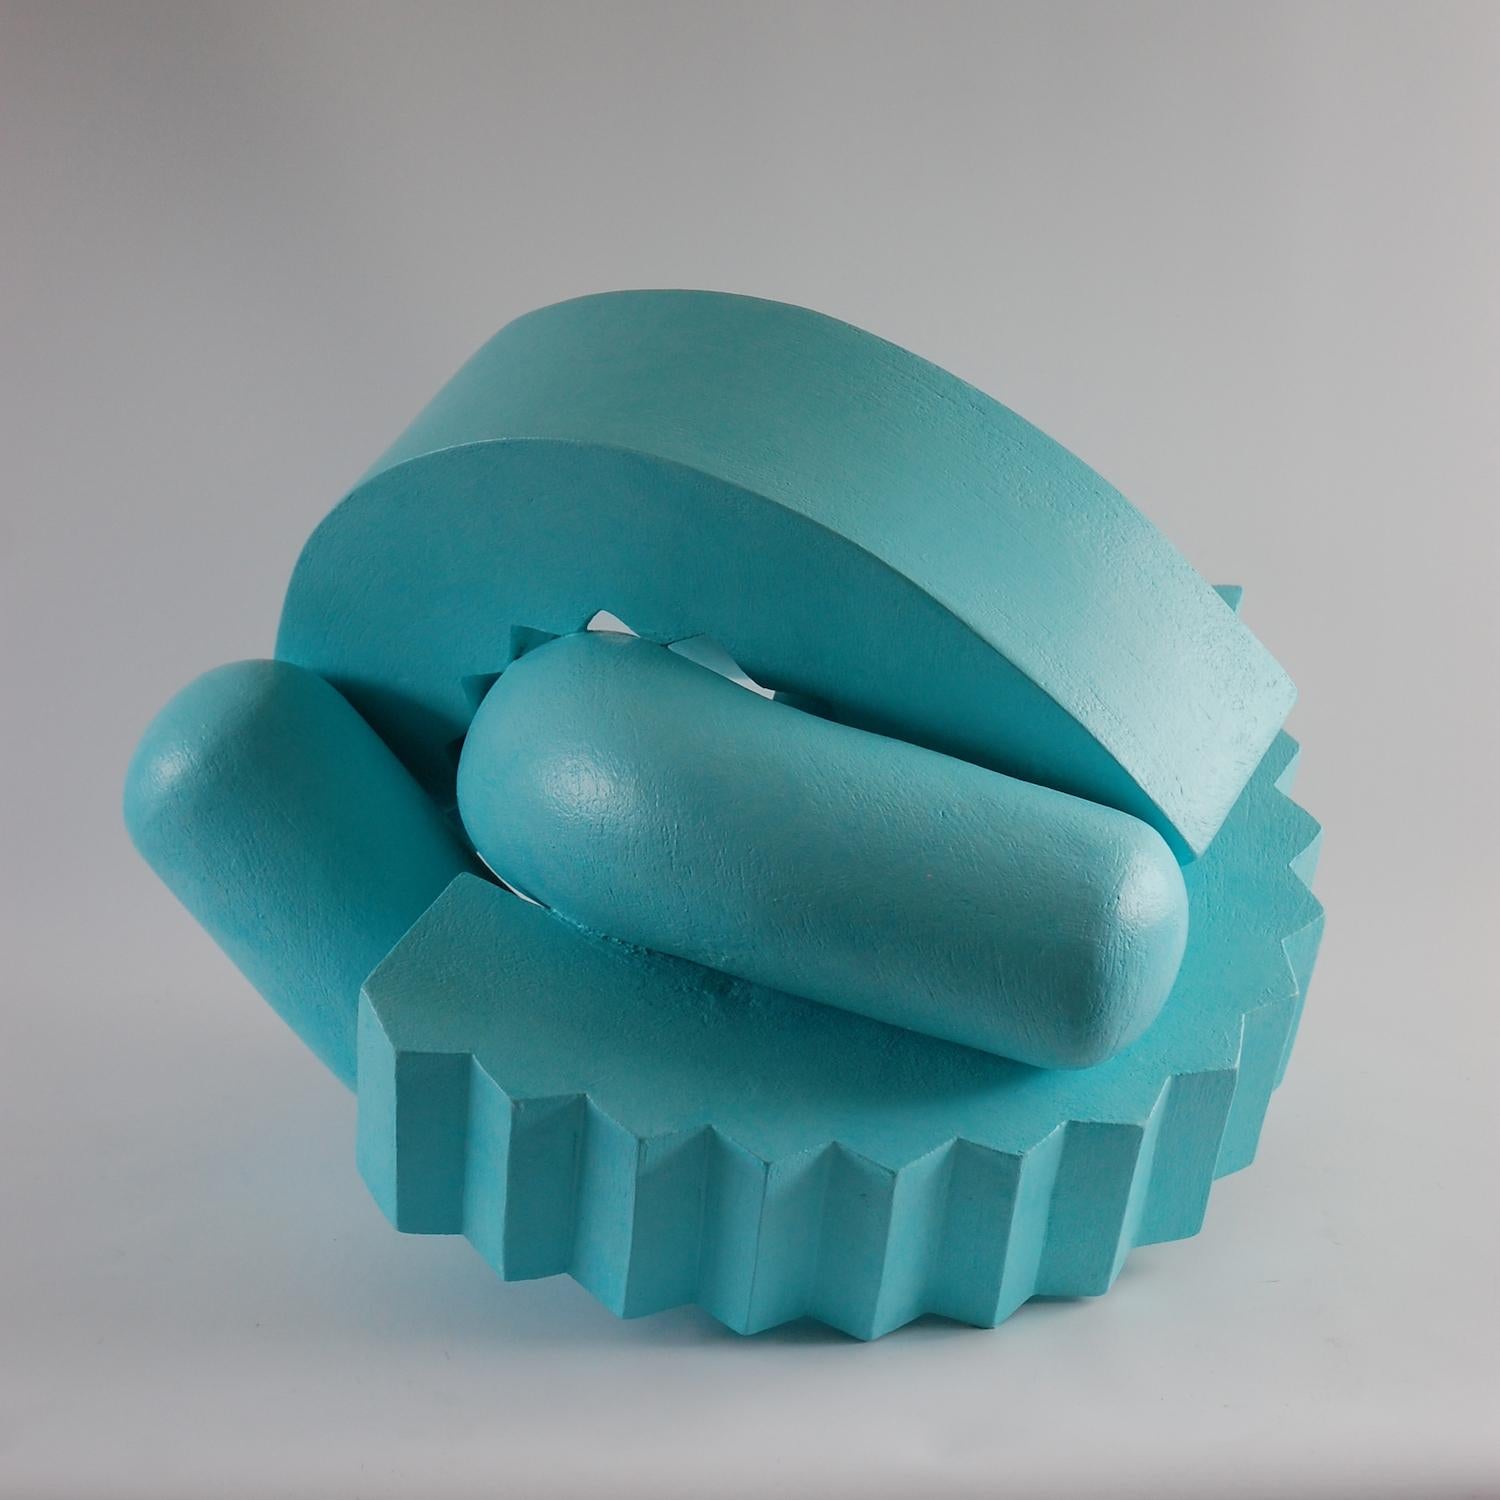 Cog (Teal) by Patricia Volk. Fired clay constructed and painted, 40 cm × 50 cm × 50 cm.
Patricia Volk is a member of the Royal Society of Sculptors (FRSS) and an Academician of the Royal West of England Academy (RWA). Her work was recently featured